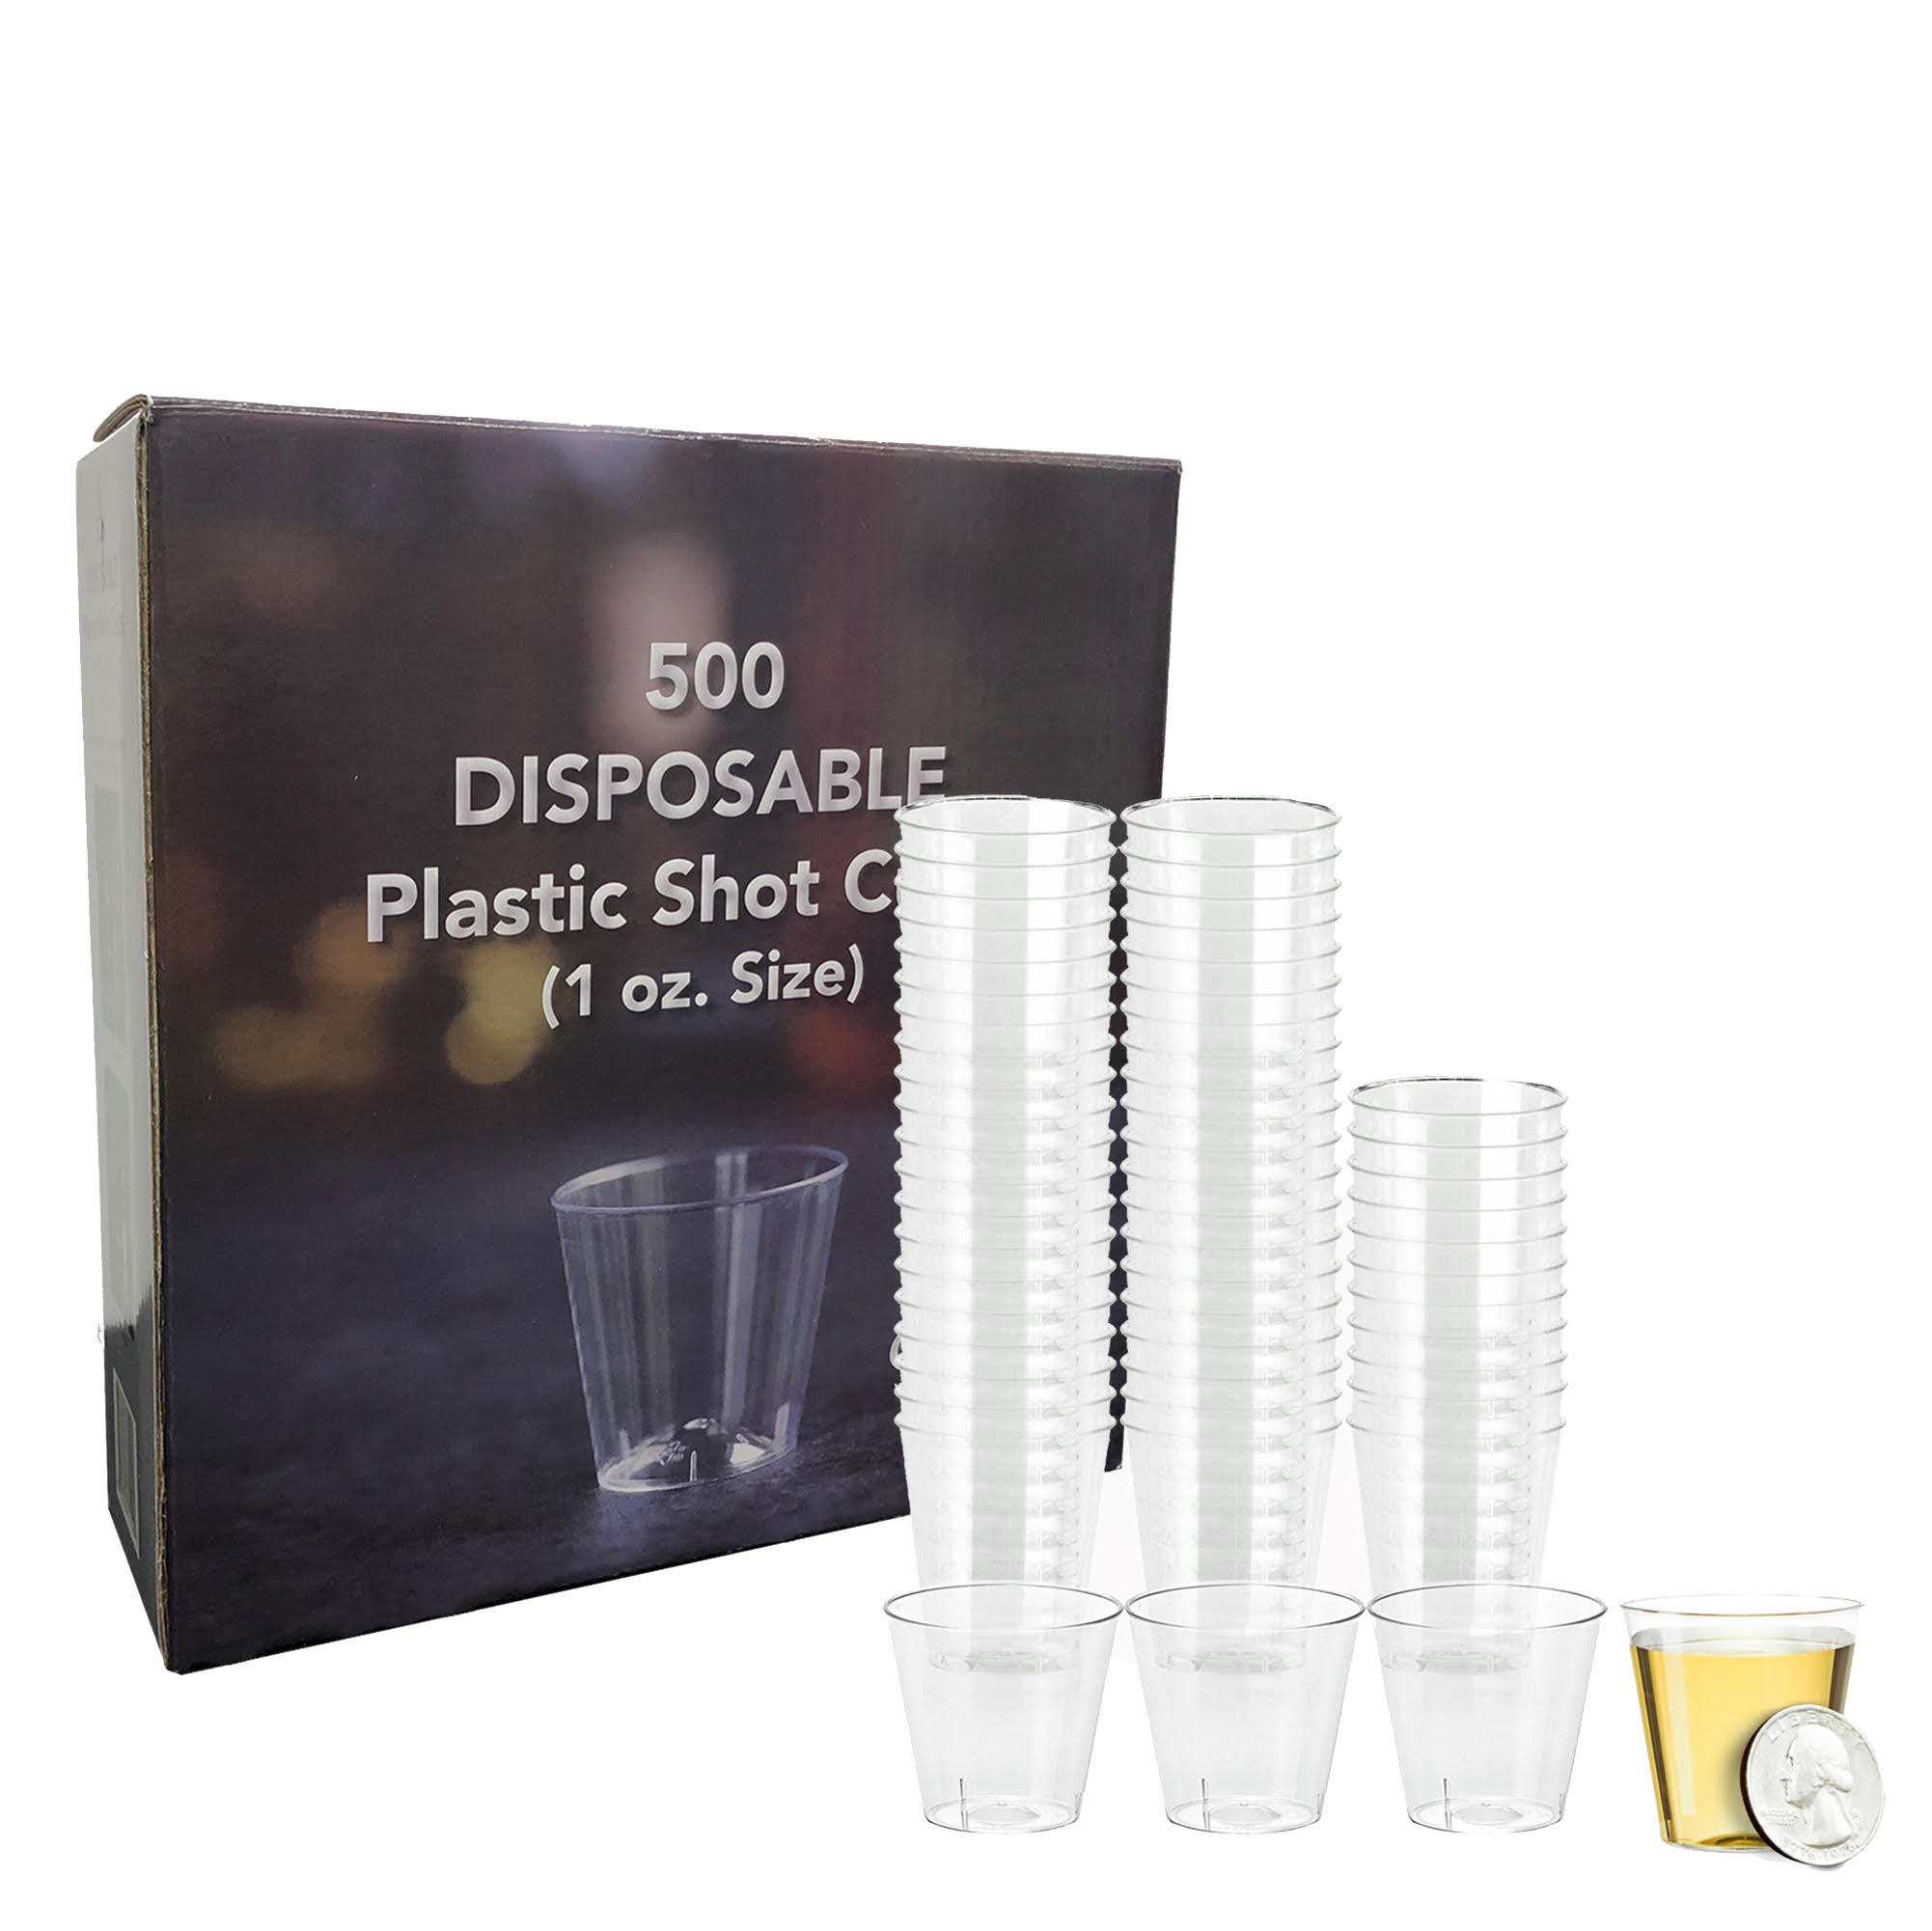 Disposable Plastic Wine Cups, 6 Per Pack - Disposable Party Cups